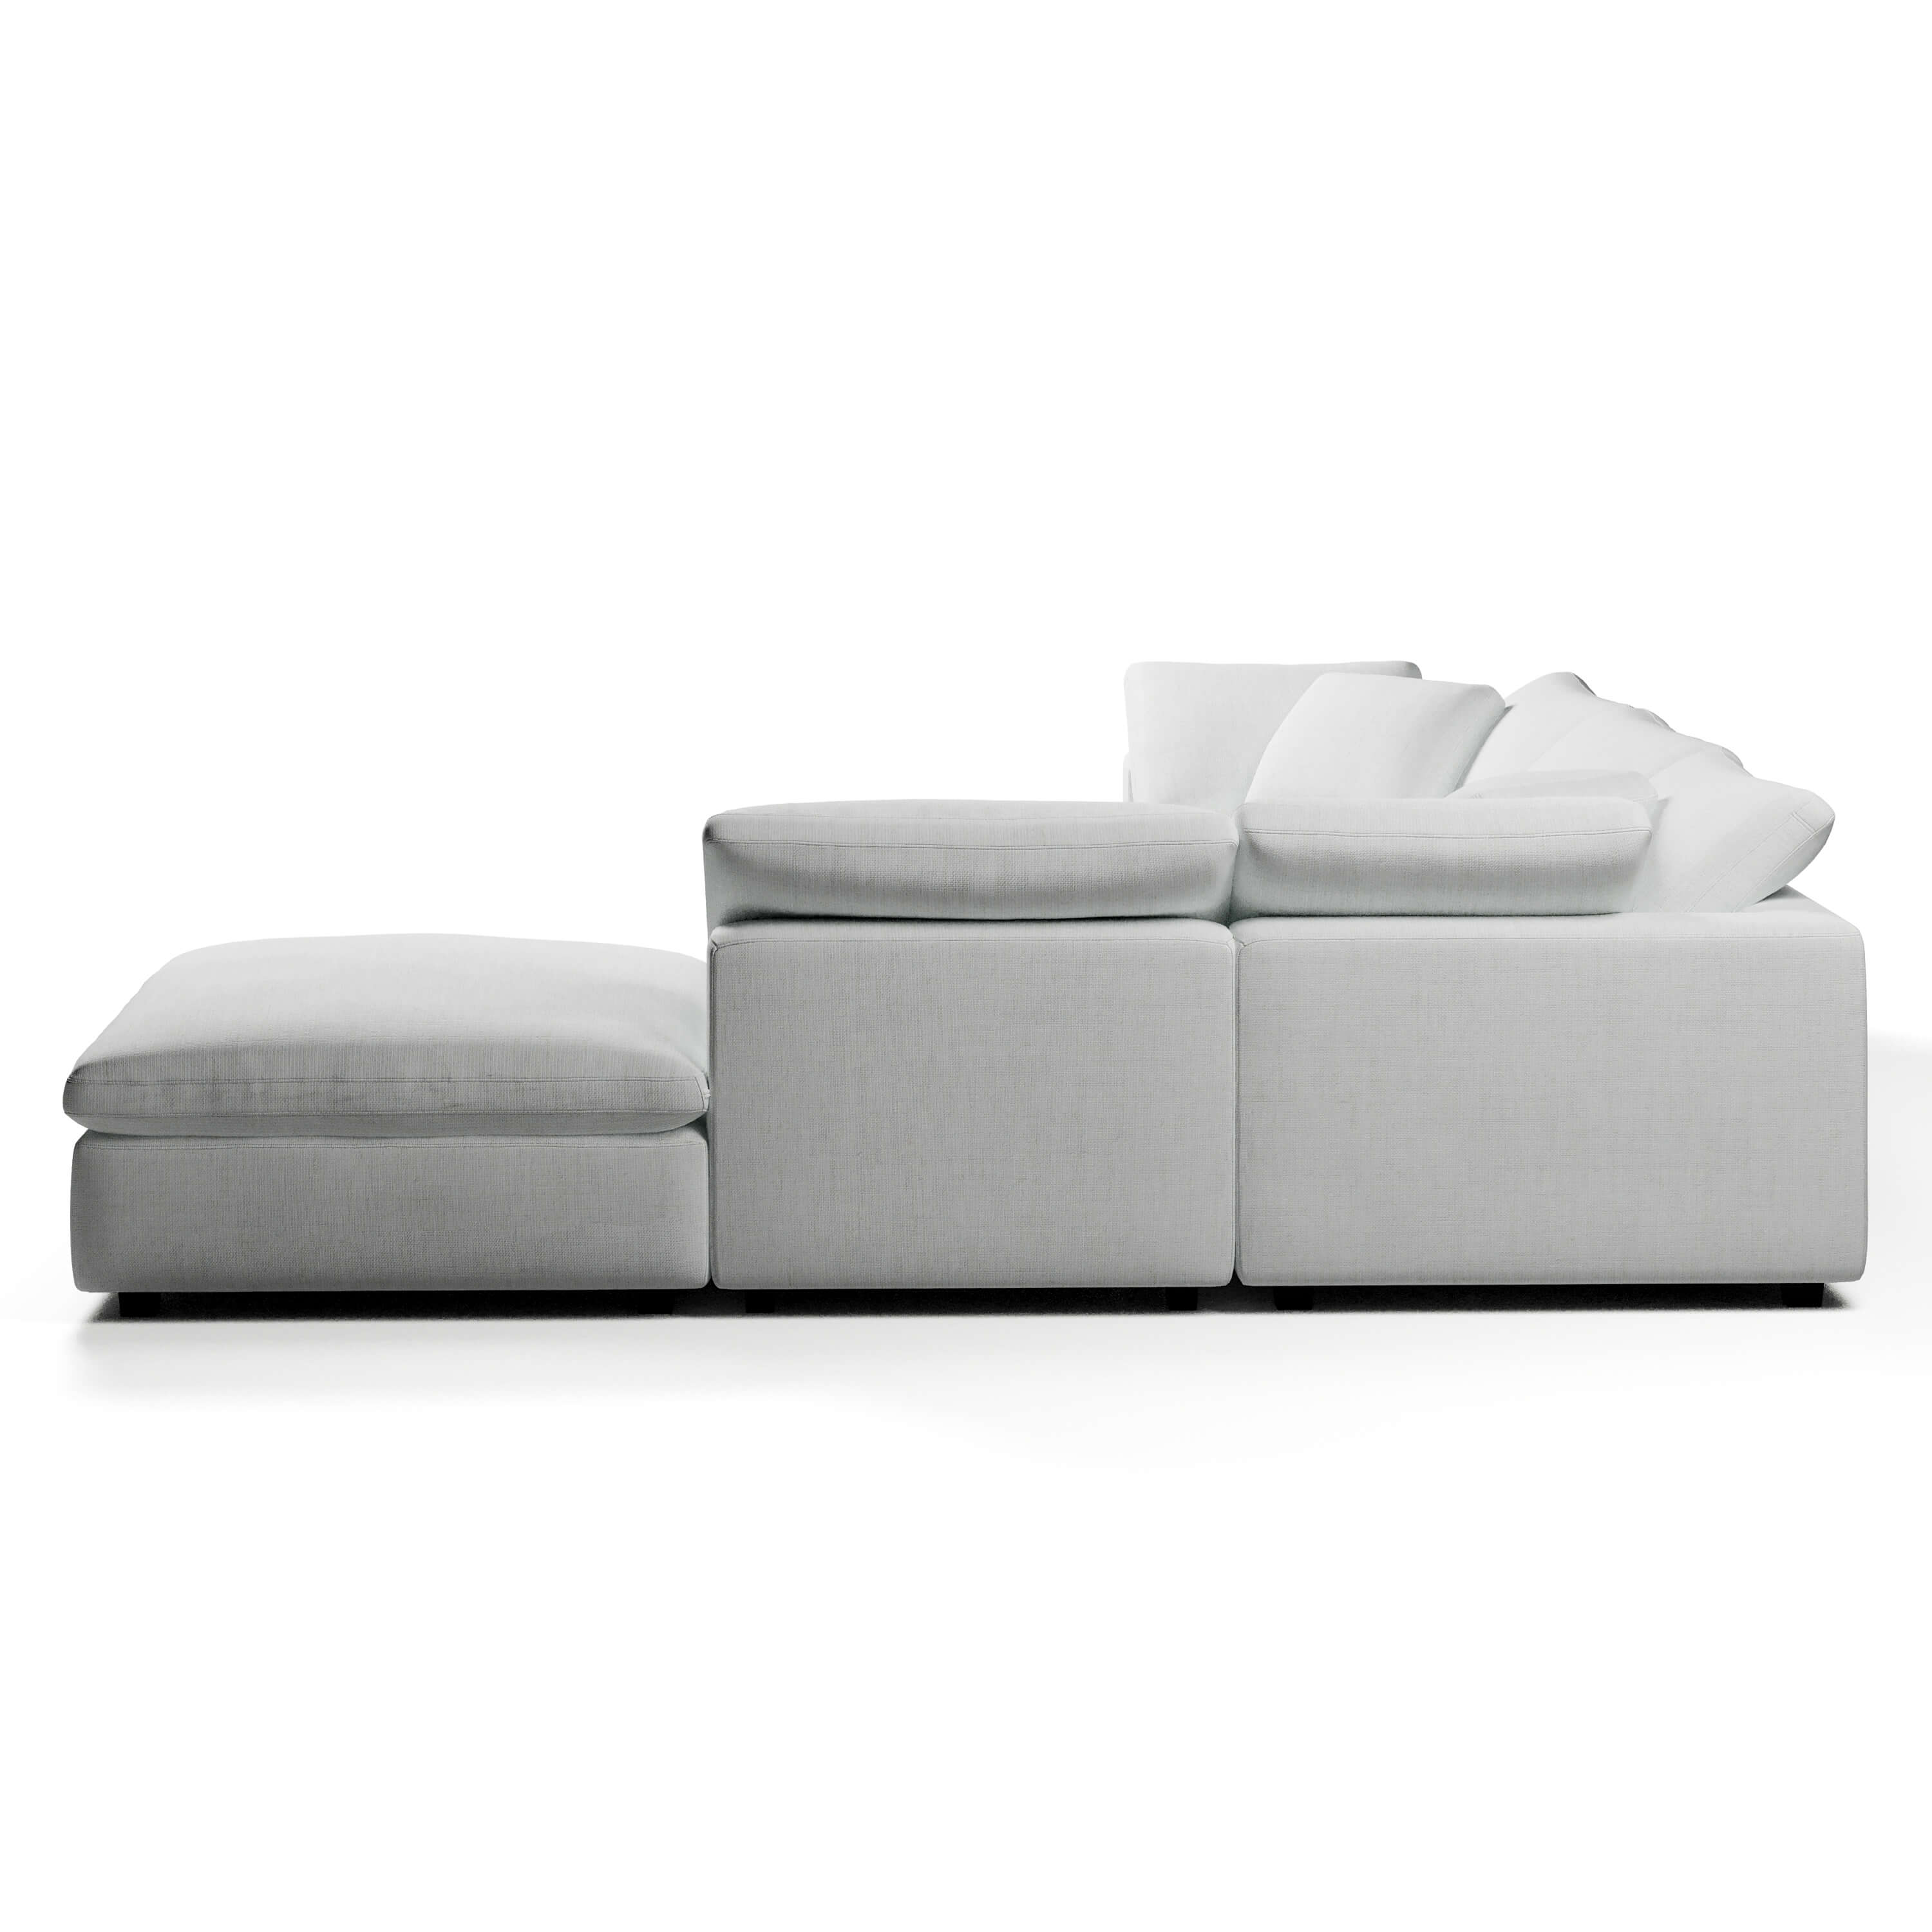 L-Shape Couch with Ottoman | Comfy Modular Sofa | Couch Haus